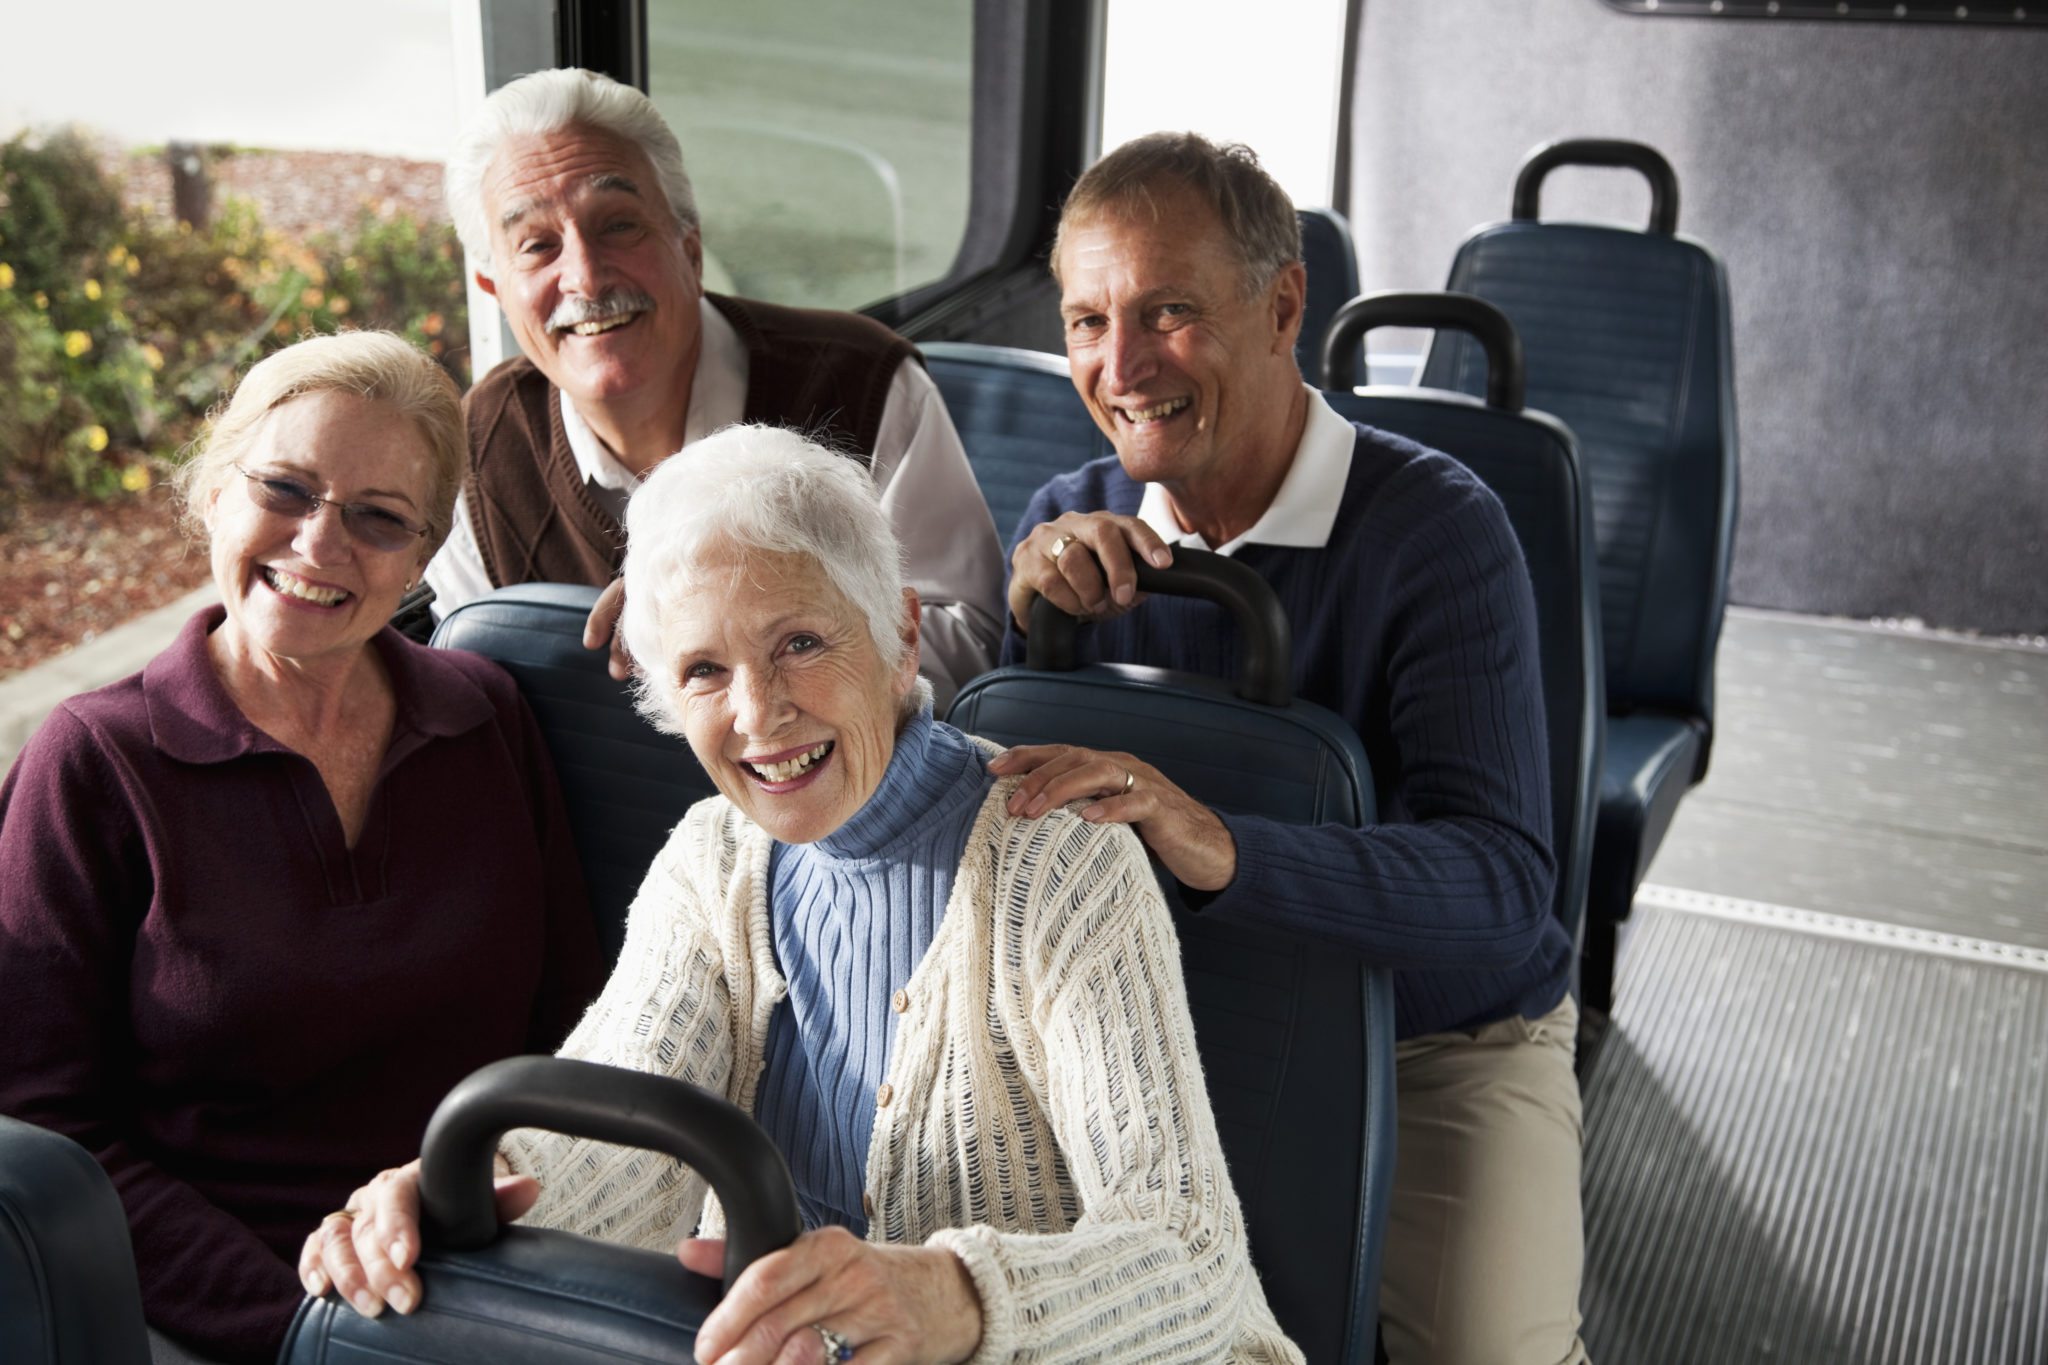 bus tours for seniors with limited mobility